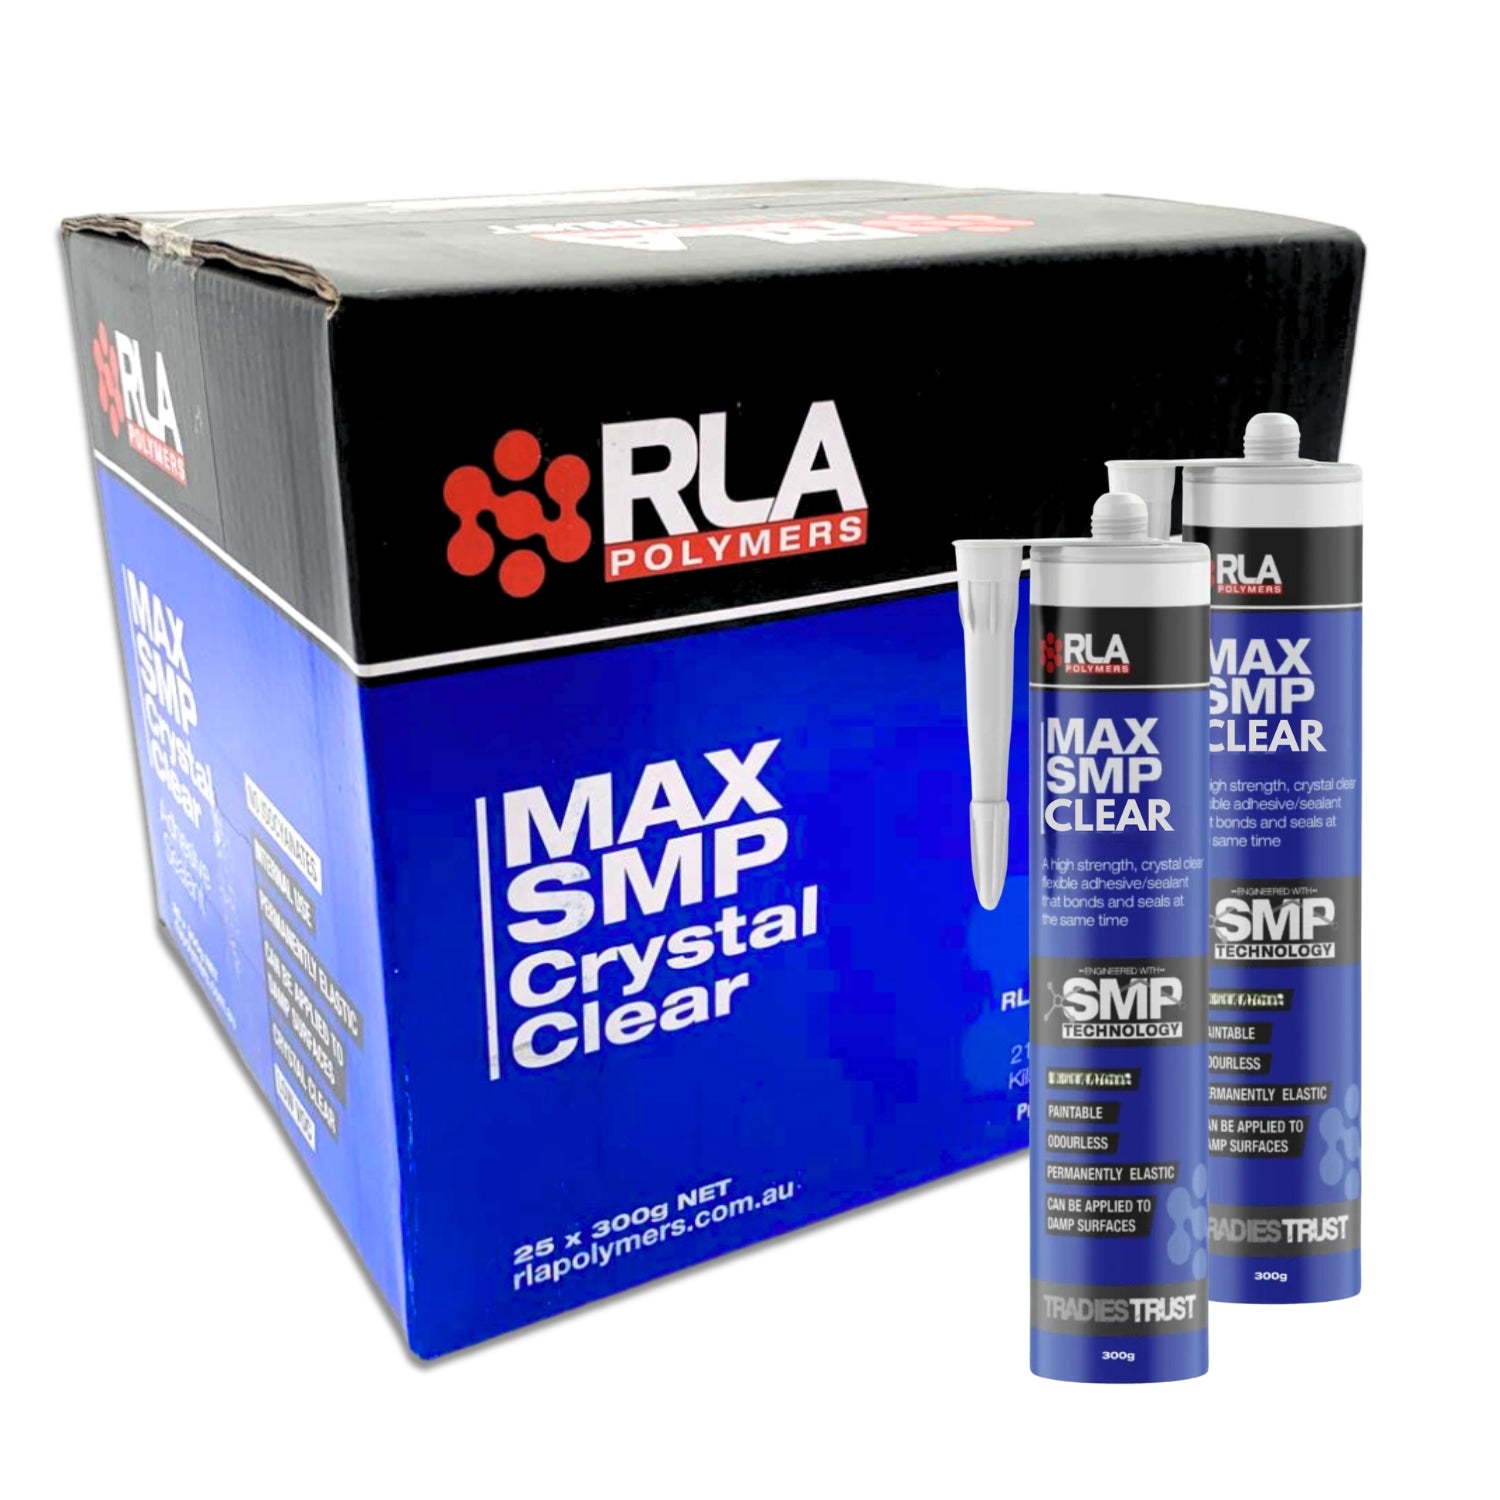 RLA Polymers Max SMP Clear Adhesive/Sealant - South East Clearance Centre